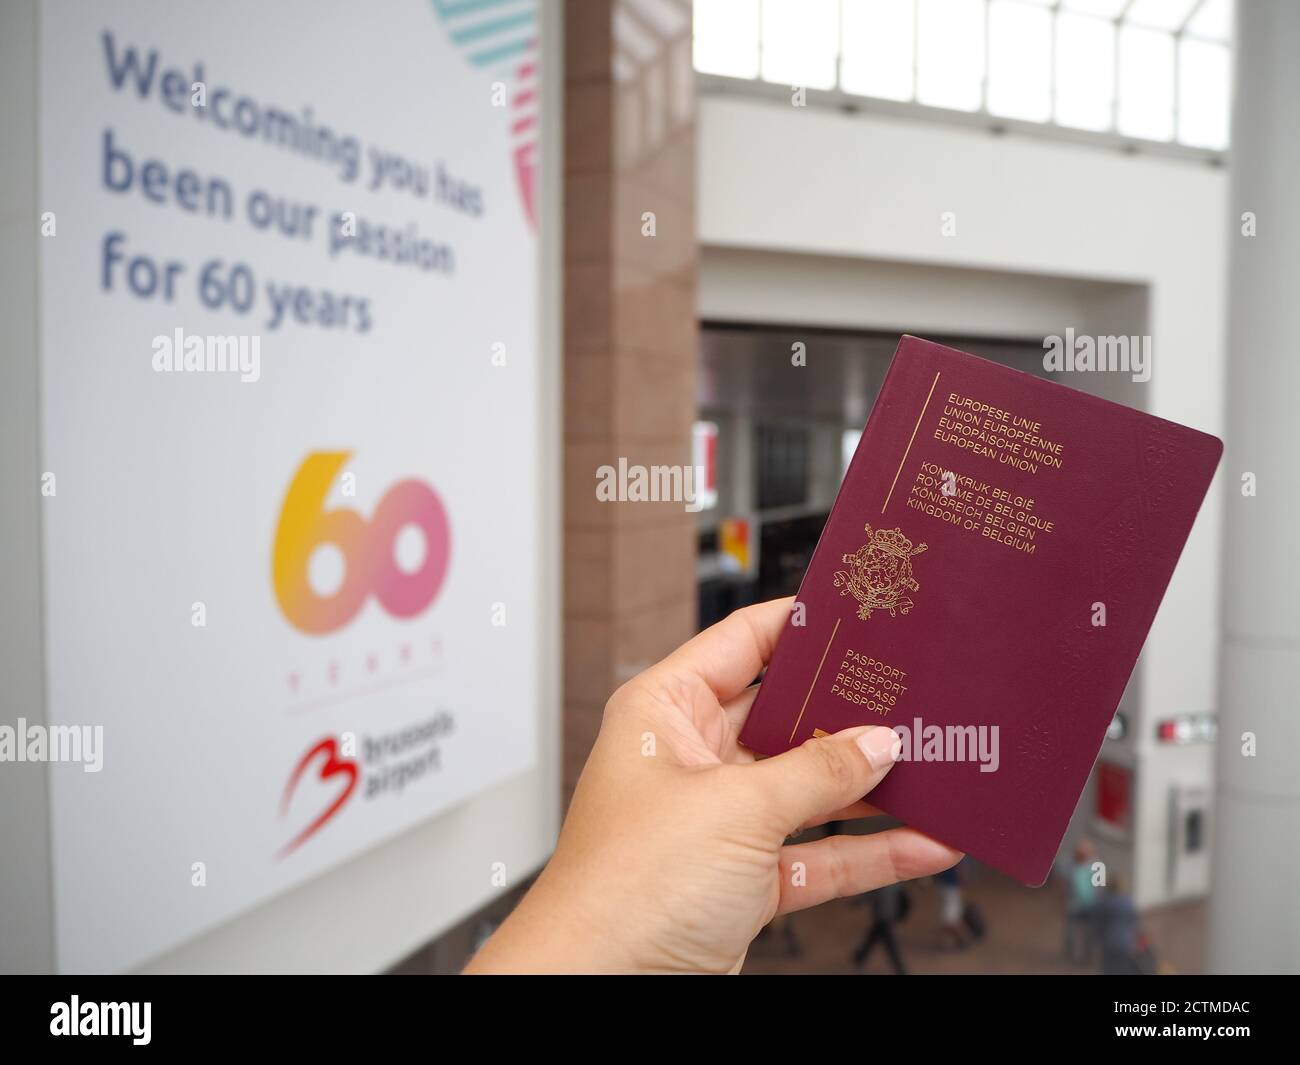 August 2018 - Zaventem,Belgium:Hand holding a Belgian passport at the check-in hall of the Brussels airport that just celebrated the 60th anniversary. Stock Photo